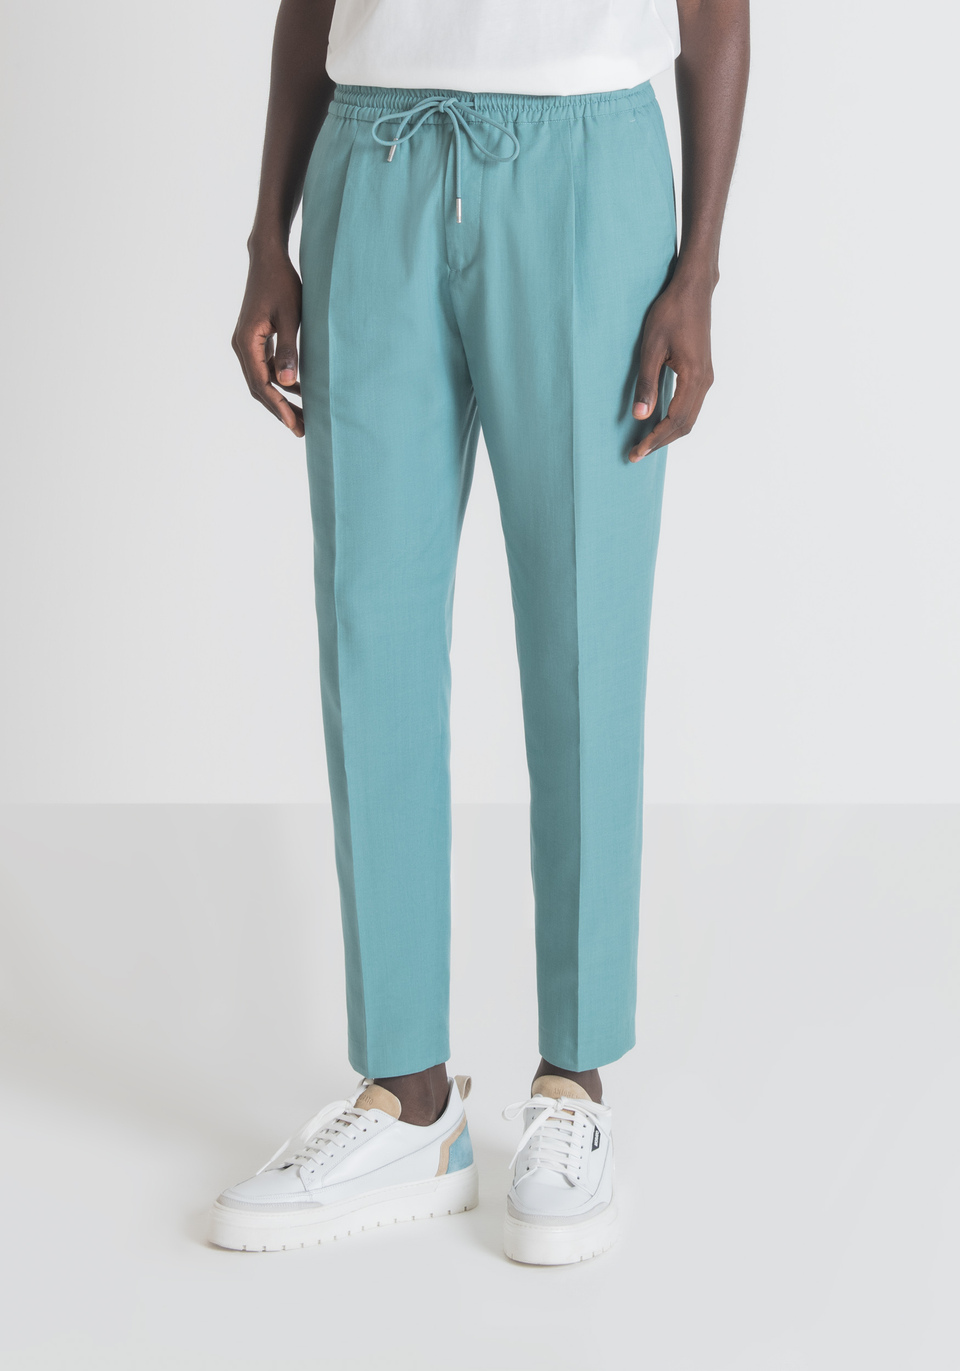 "NEIL" REGULAR-FIT TROUSERS IN COTTON AND LYOCELL BLEND - Antony Morato Online Shop